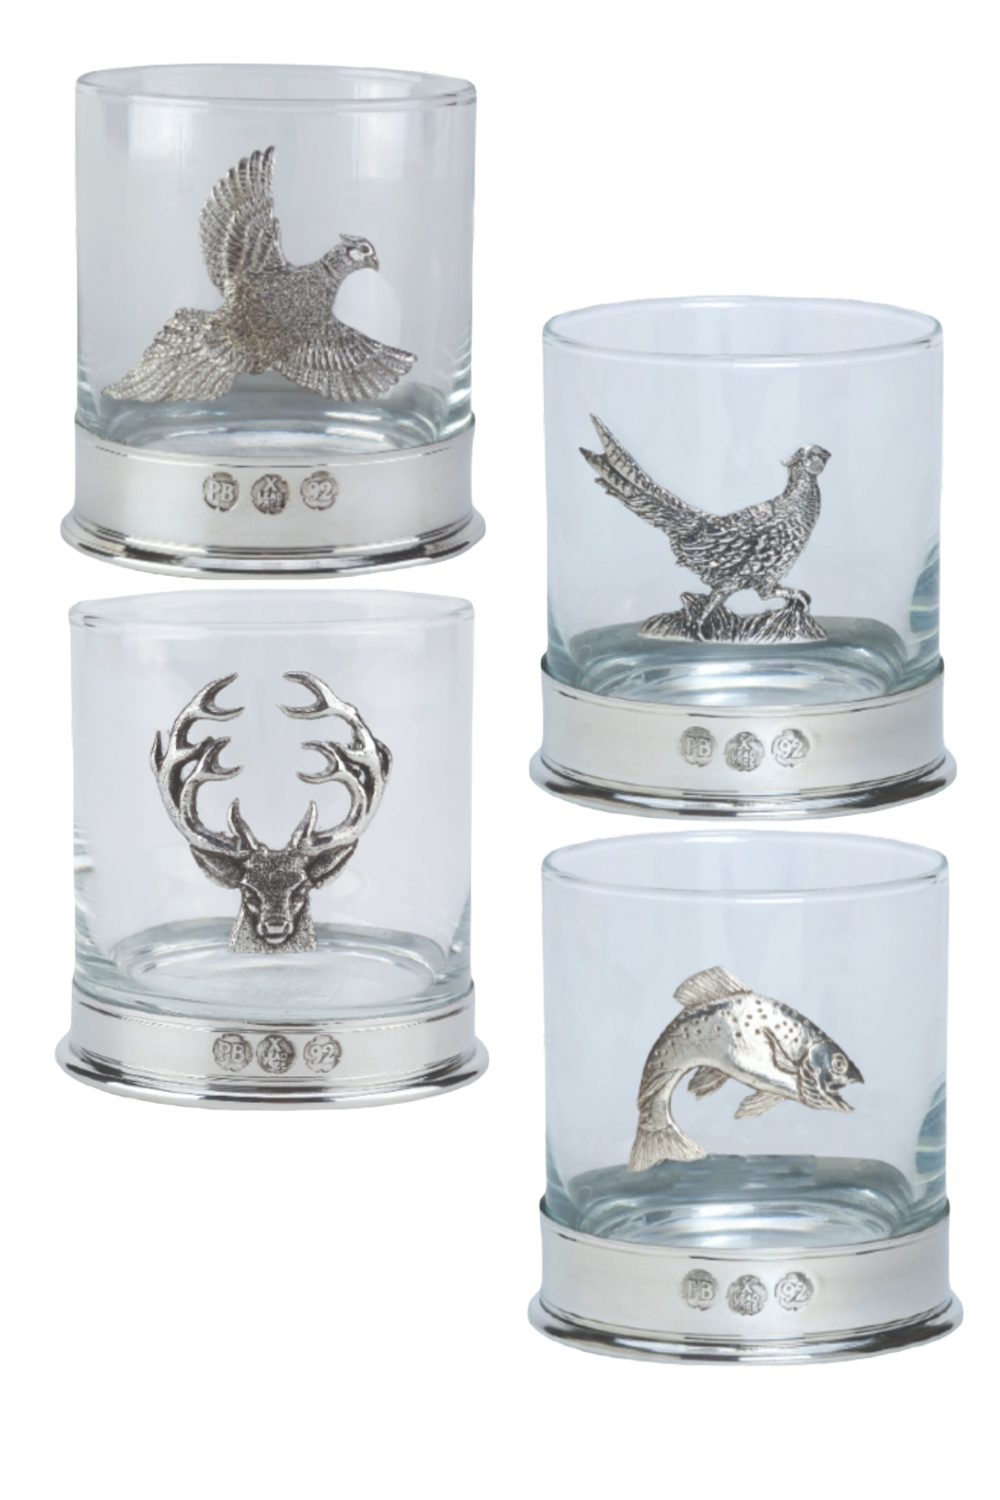 Bisley Whisky Glasses In Flying Pheasant, Running Pheasant, Stag and Trout